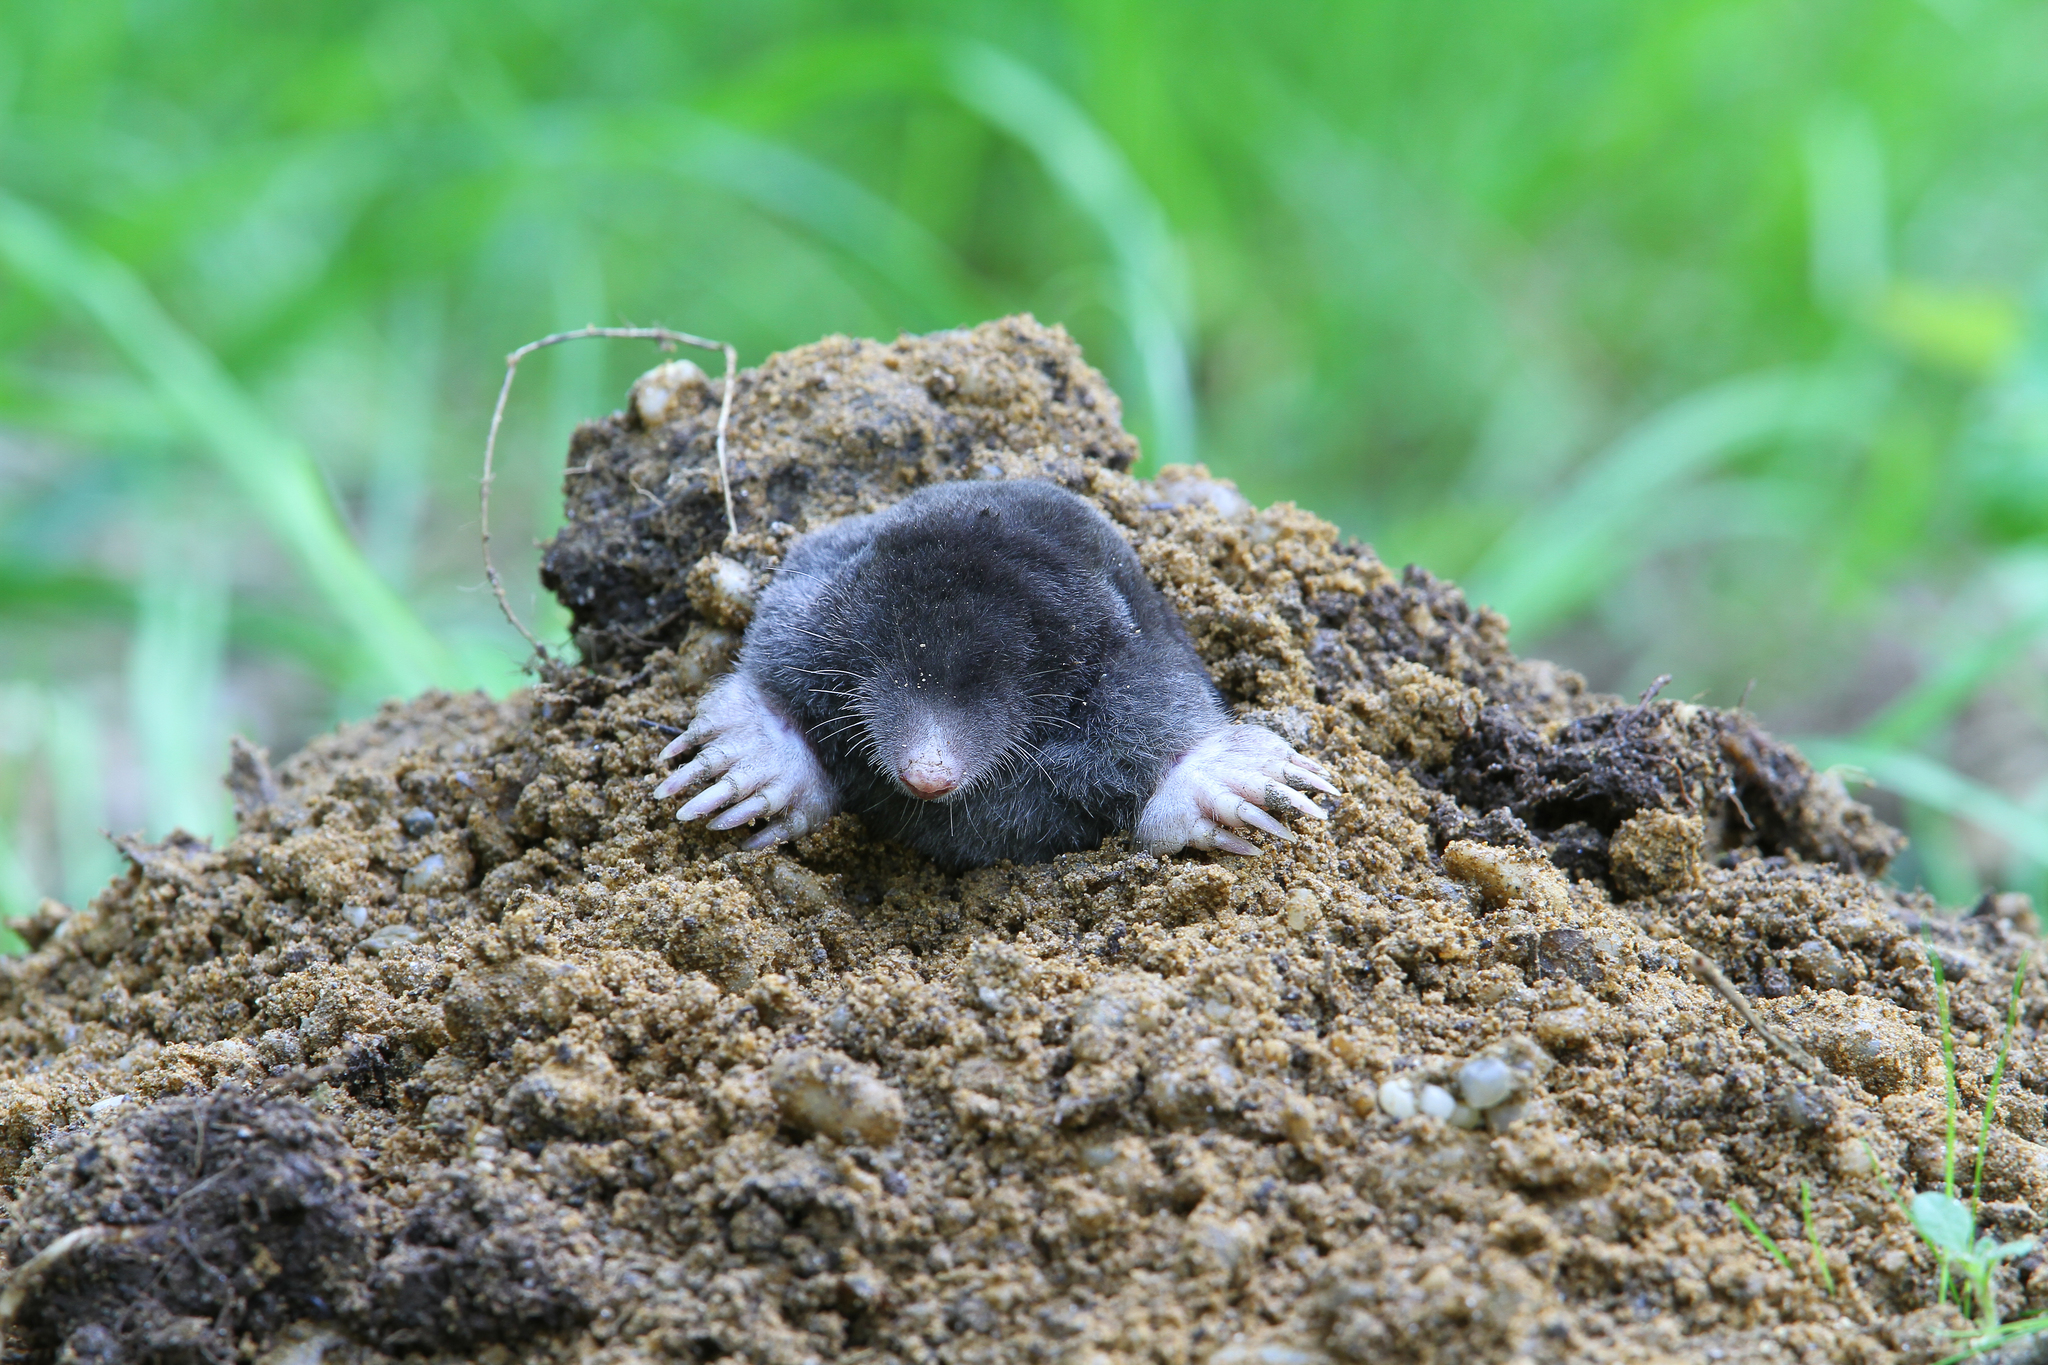 A grey critter with huge “hands” bearing long claws, pokes out from the top of a mound of dirt. Common mole has a short, tapered snout and tiny eyes that aren’t even visible in this head-on view.